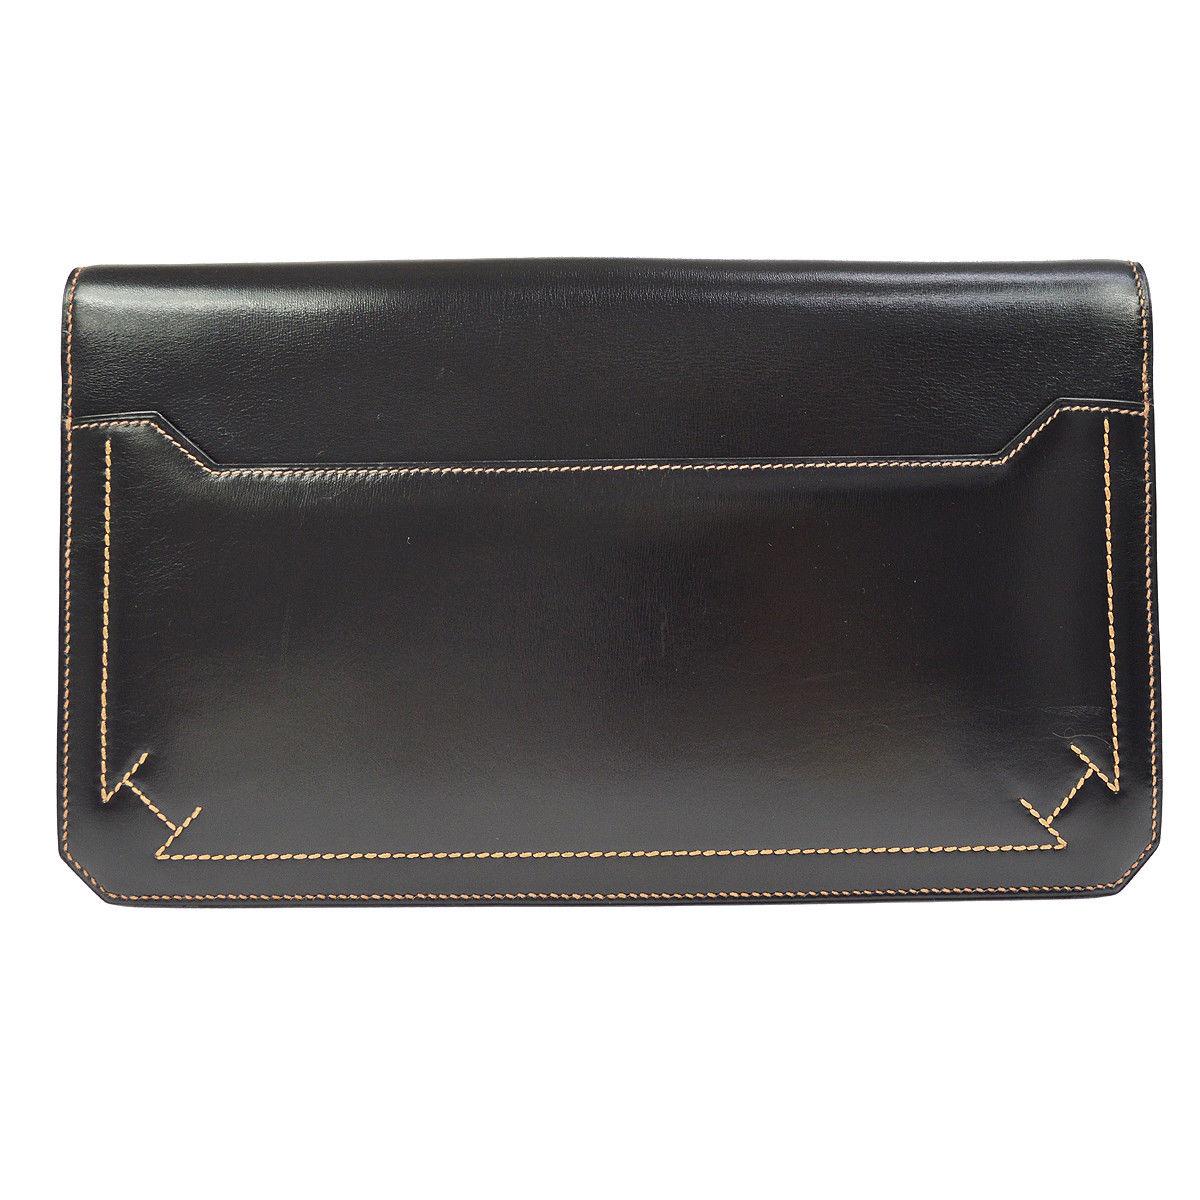 Women's Hermes Leather Black Whipstitch Evening Envelope Fold in Flap Clutch Bag